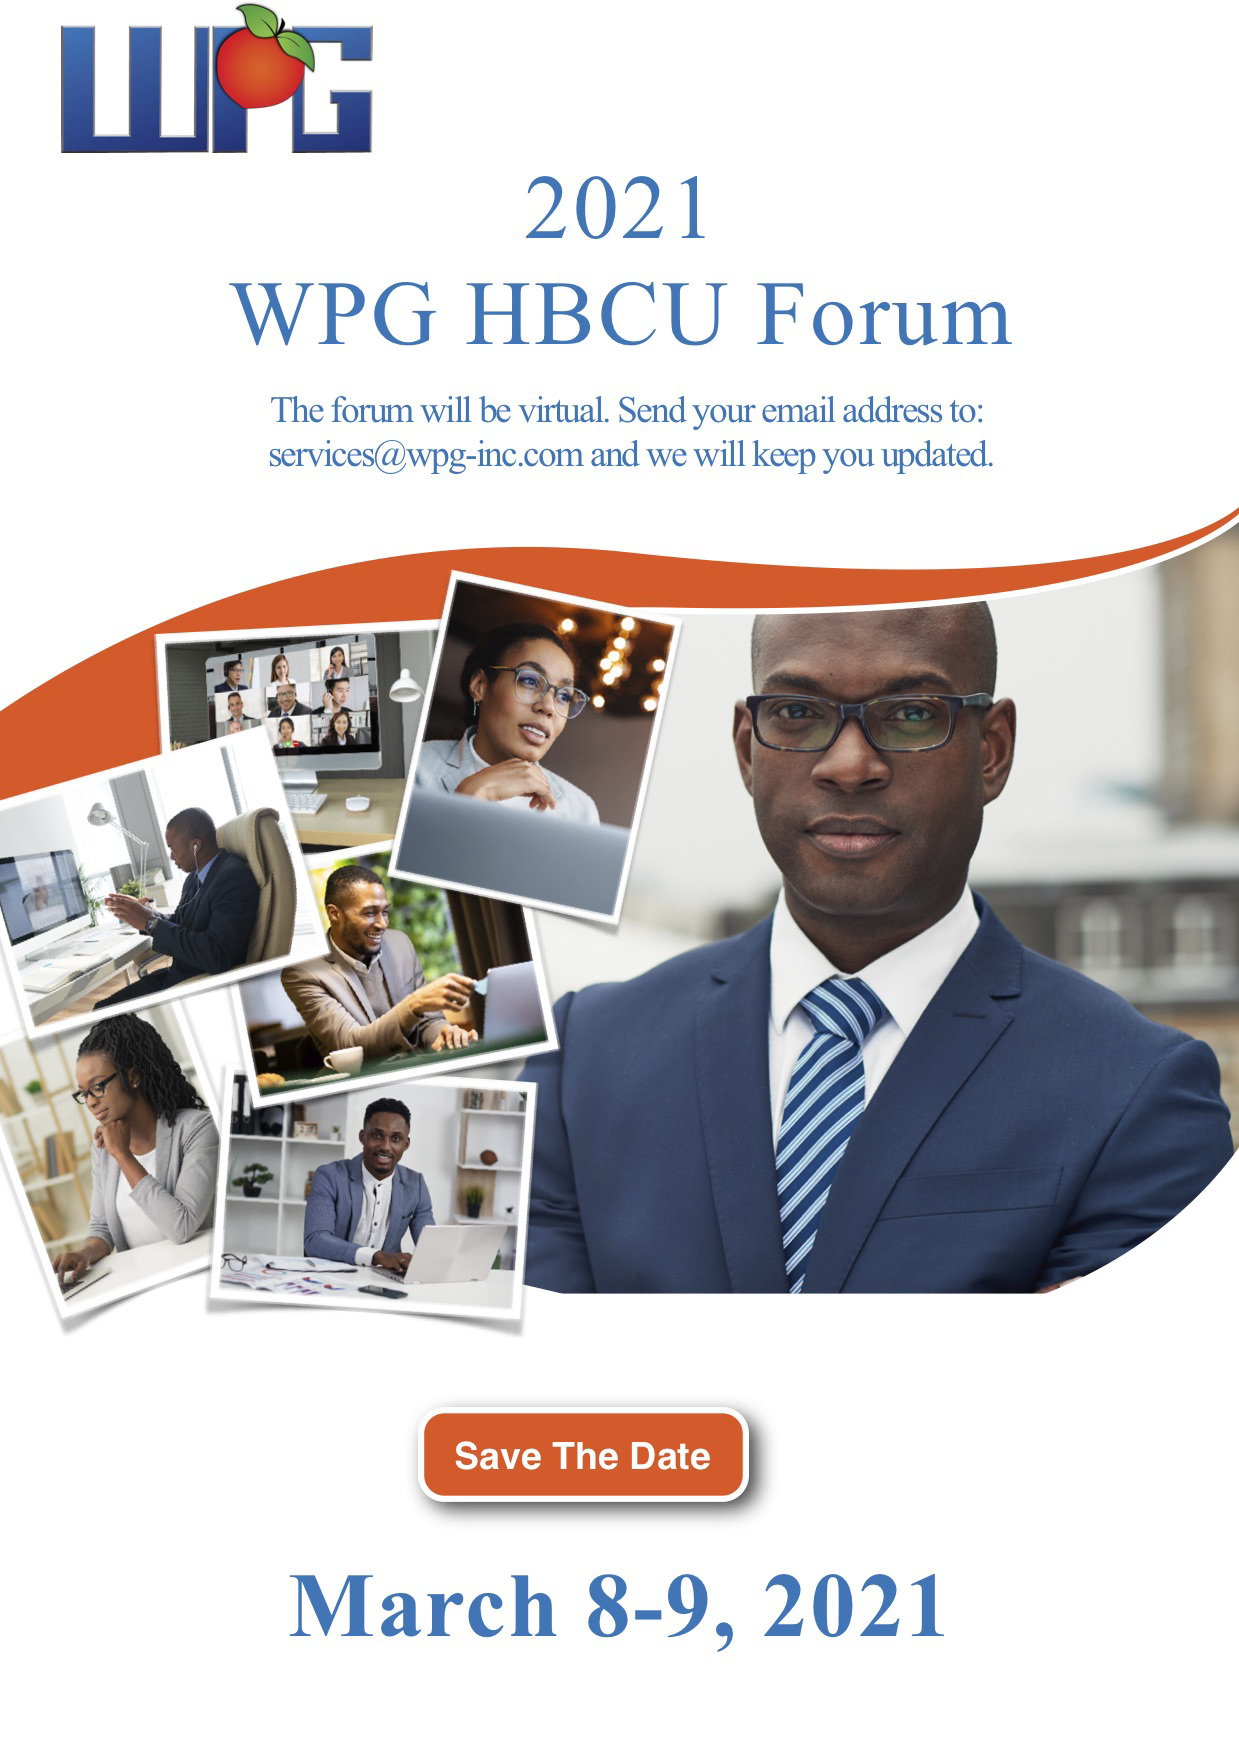 Save the Date: 2021 WPG HBCU Forum will be held March 8-9, 2021